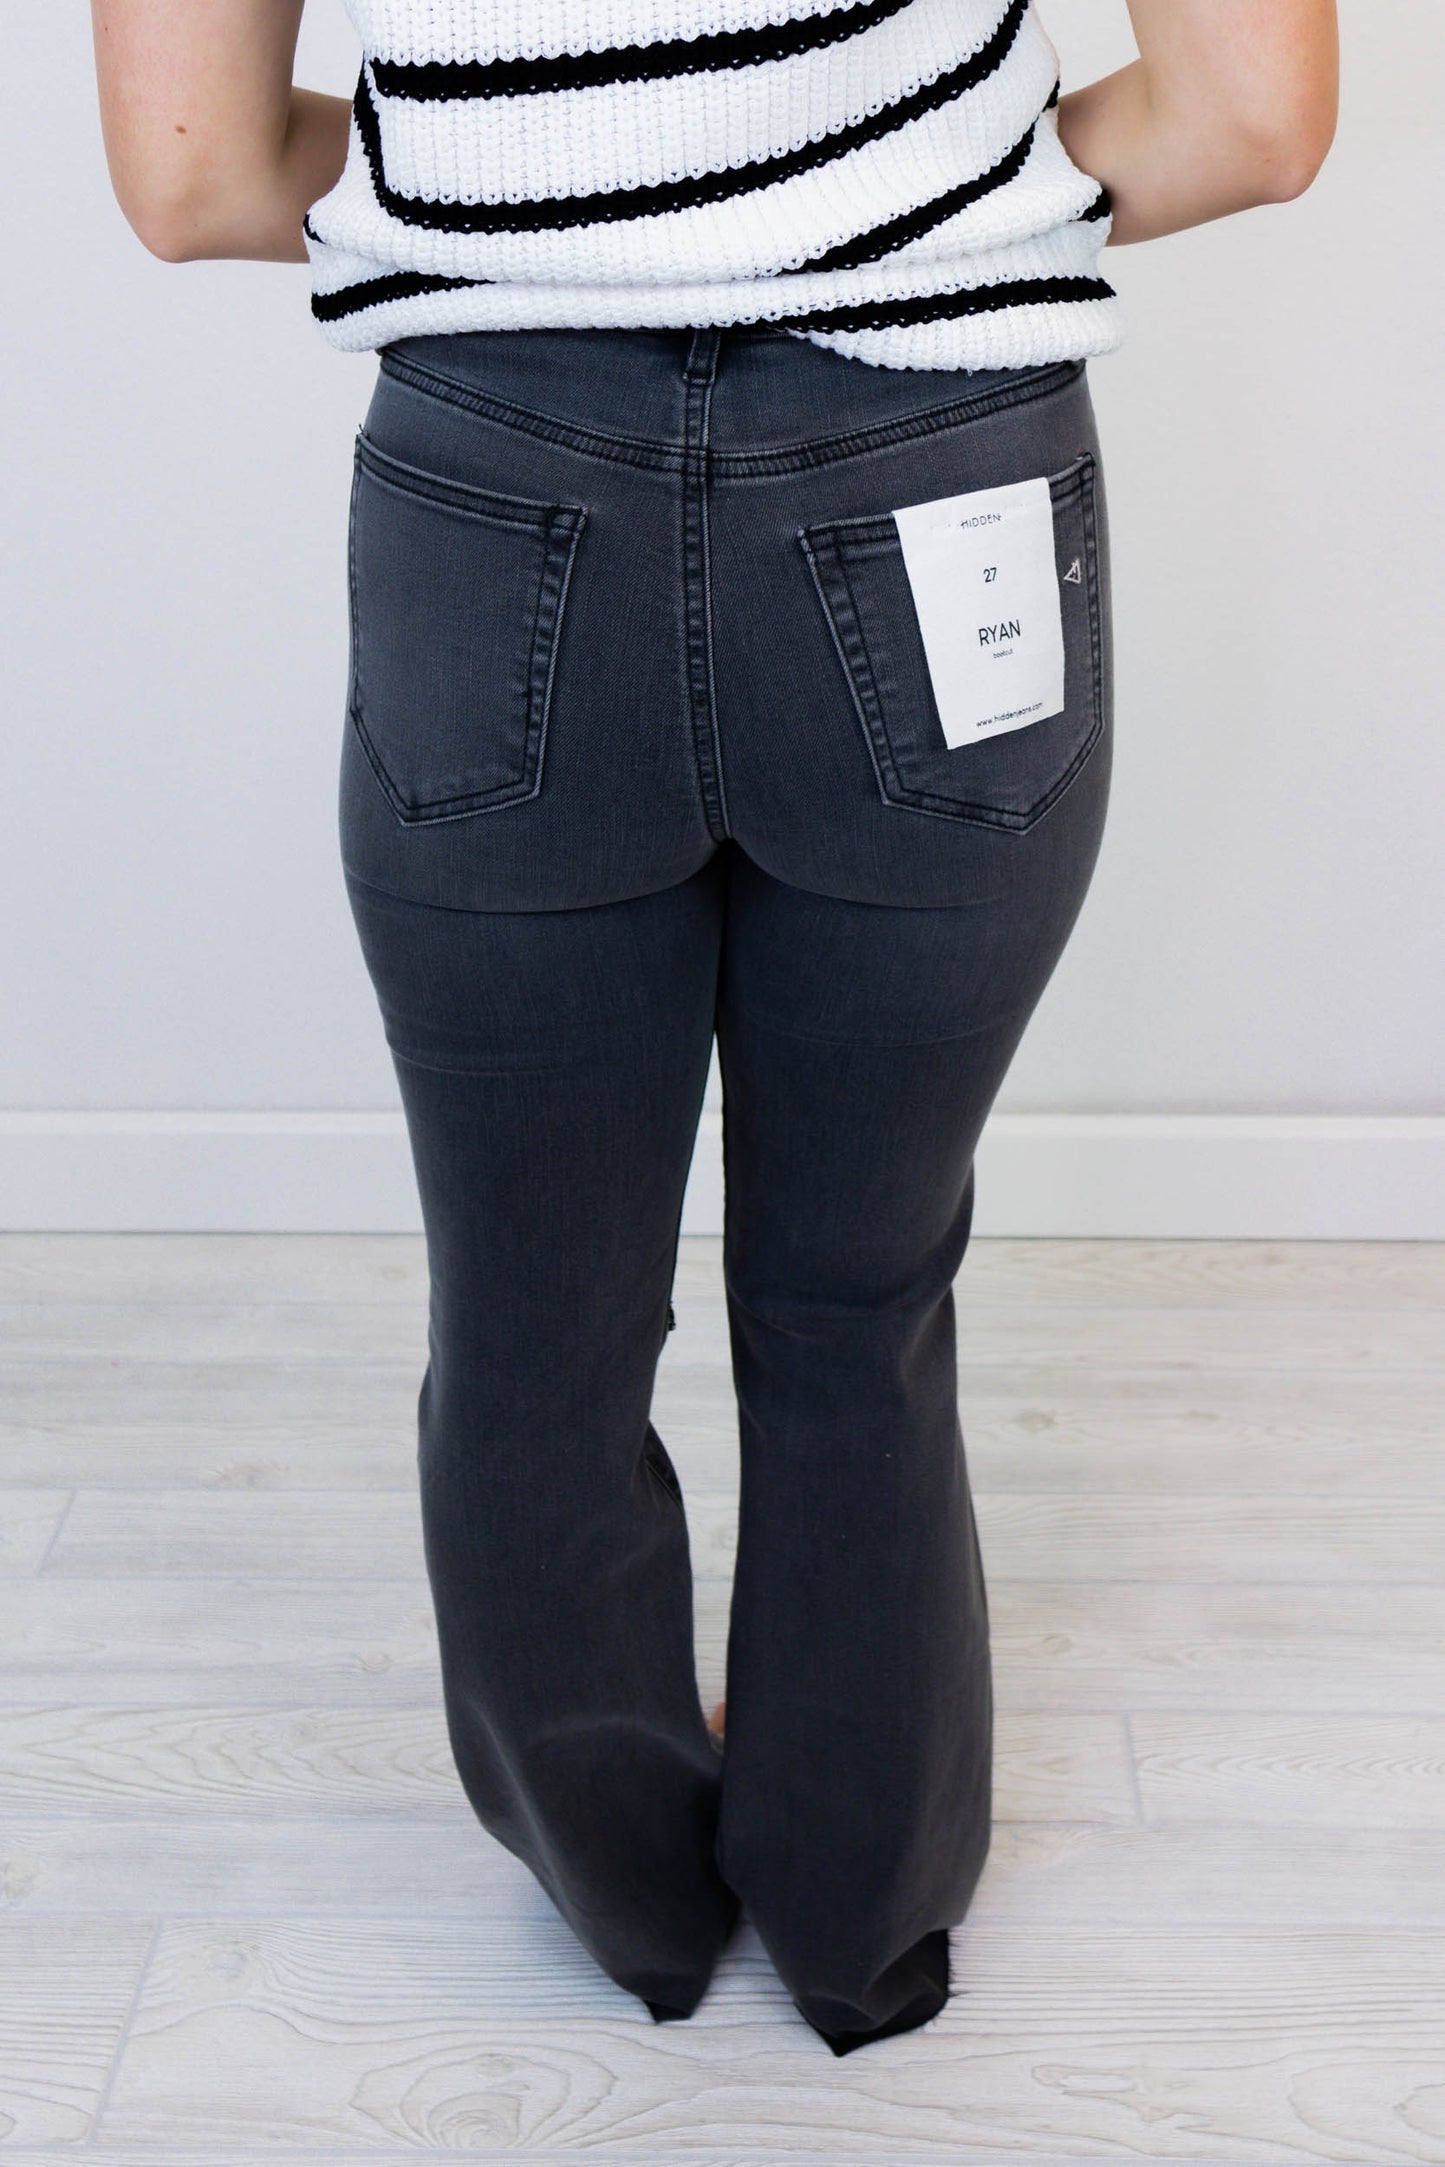 Baby Blue Bell Bottom Flare Jeans – The Vault Co.